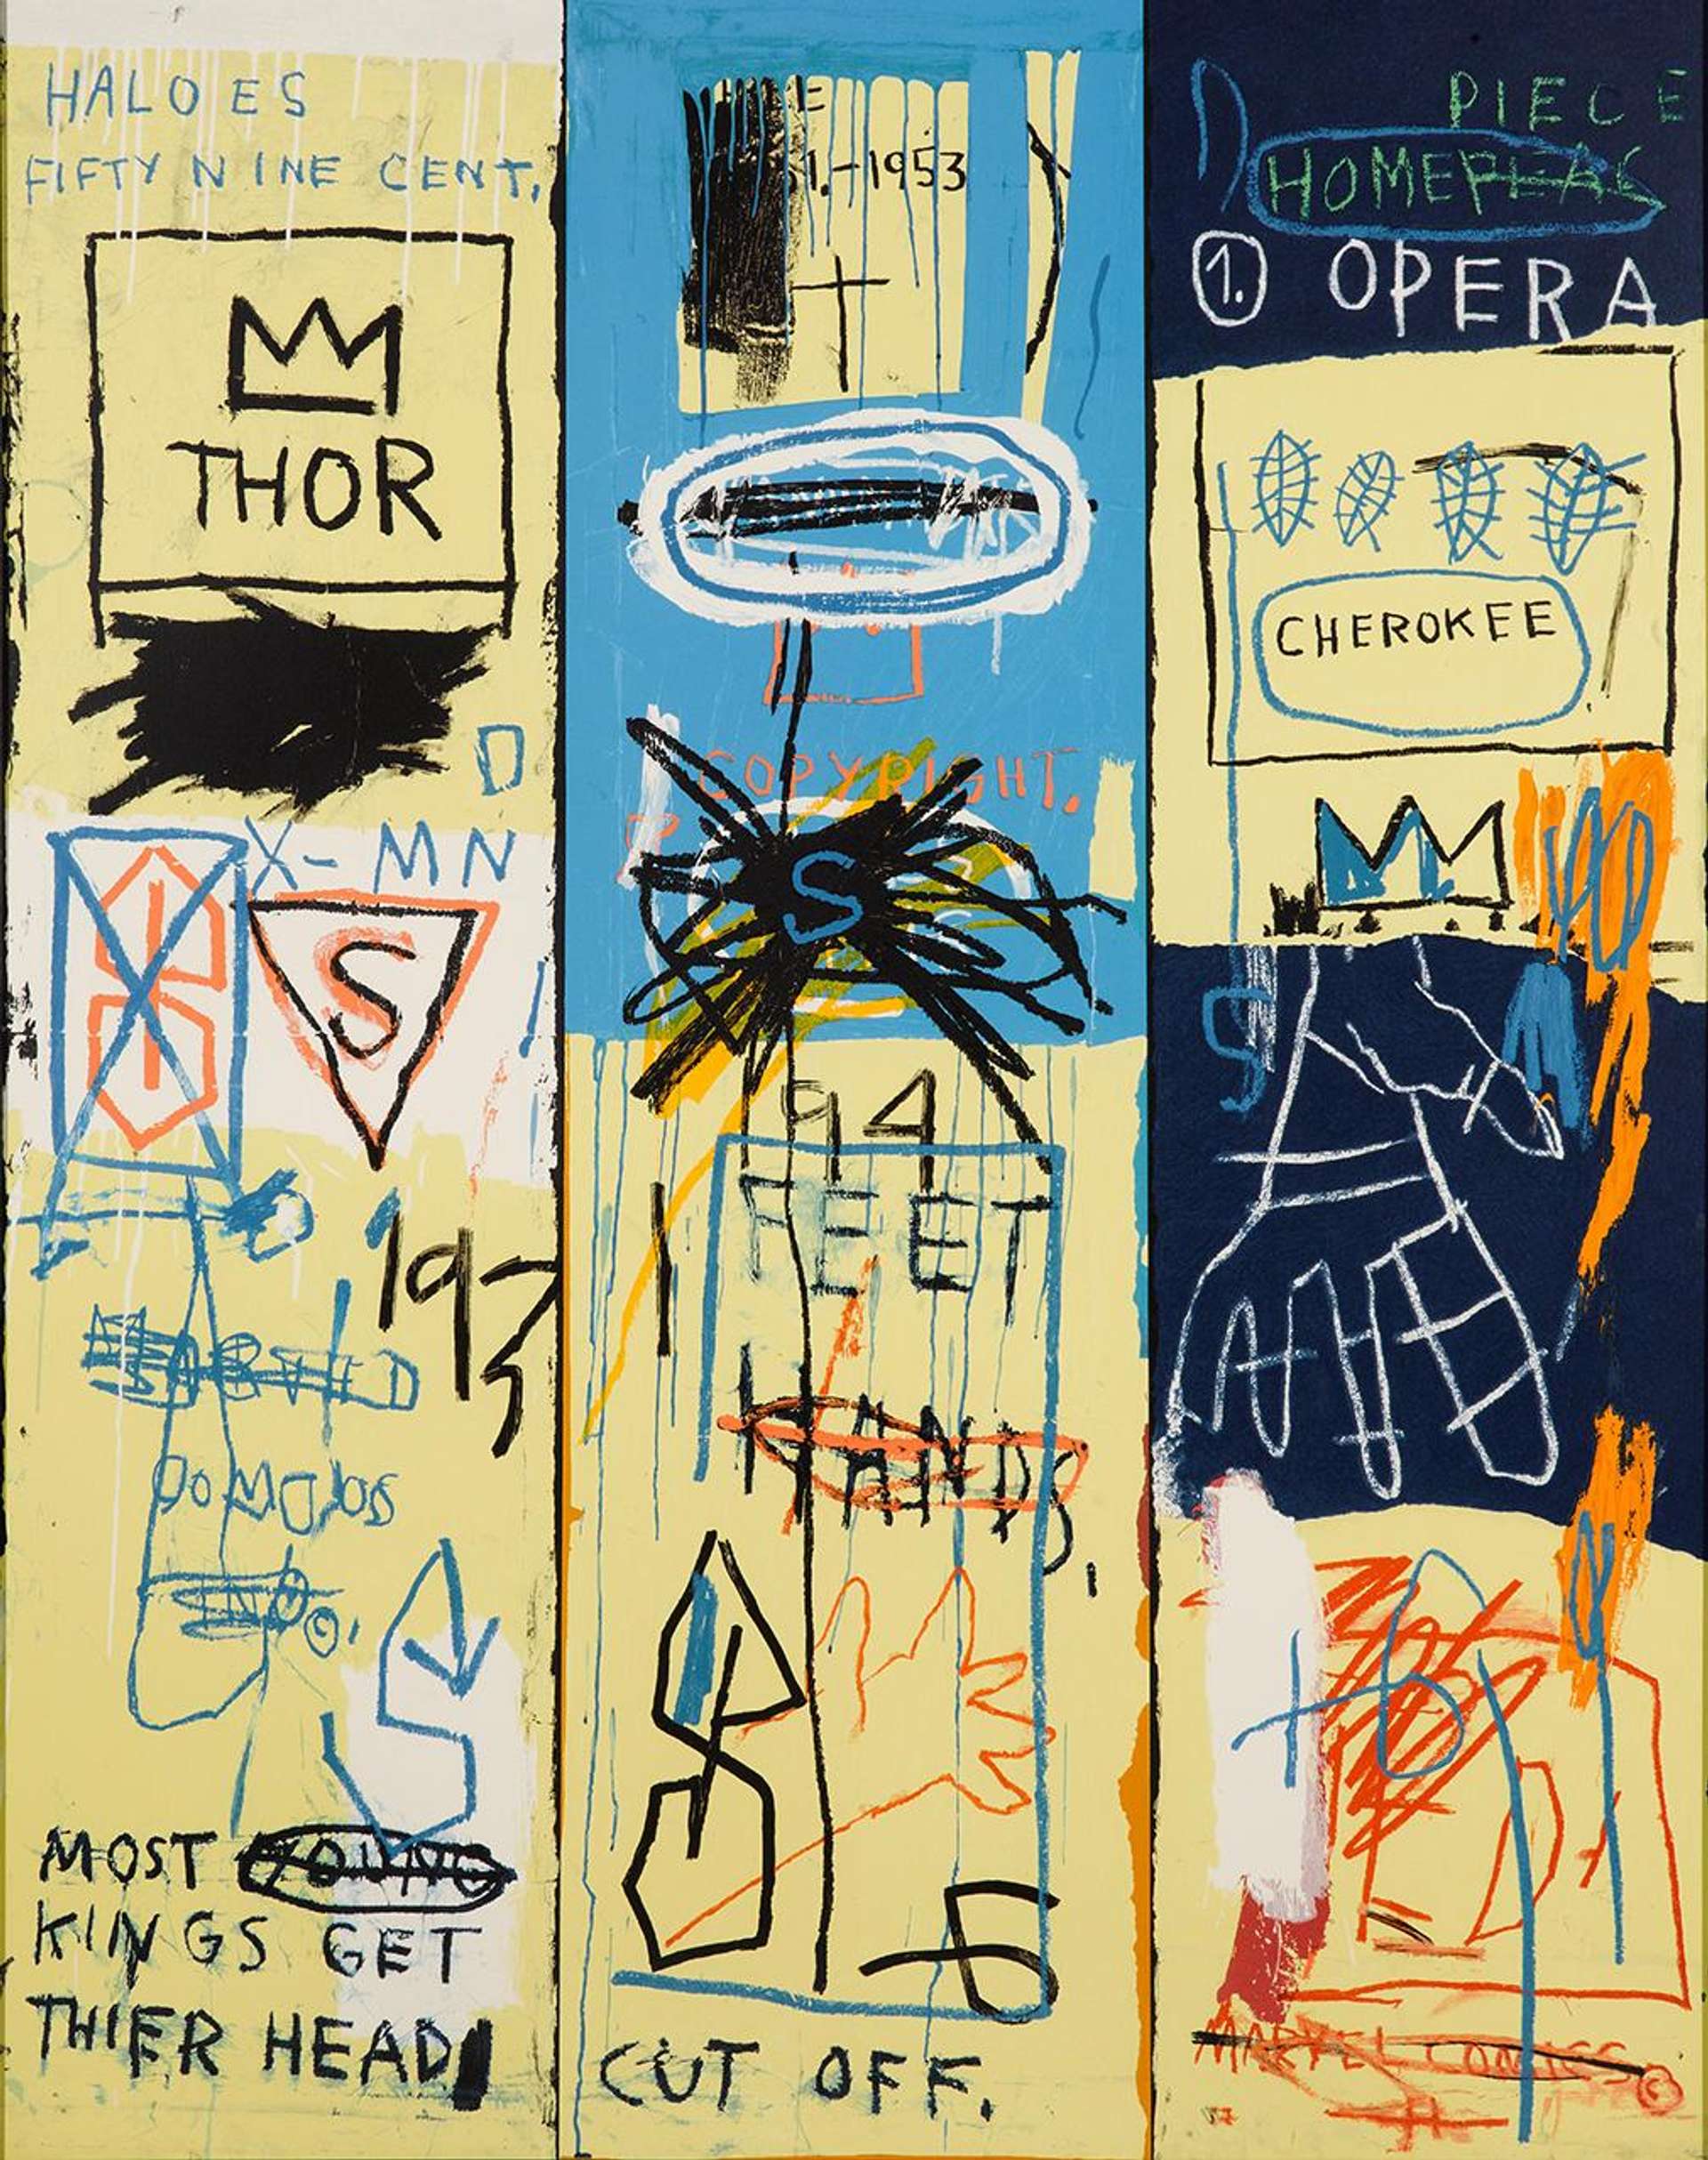 Charles The First - Unsigned Print by Jean-Michel Basquiat 2004 - MyArtBroker